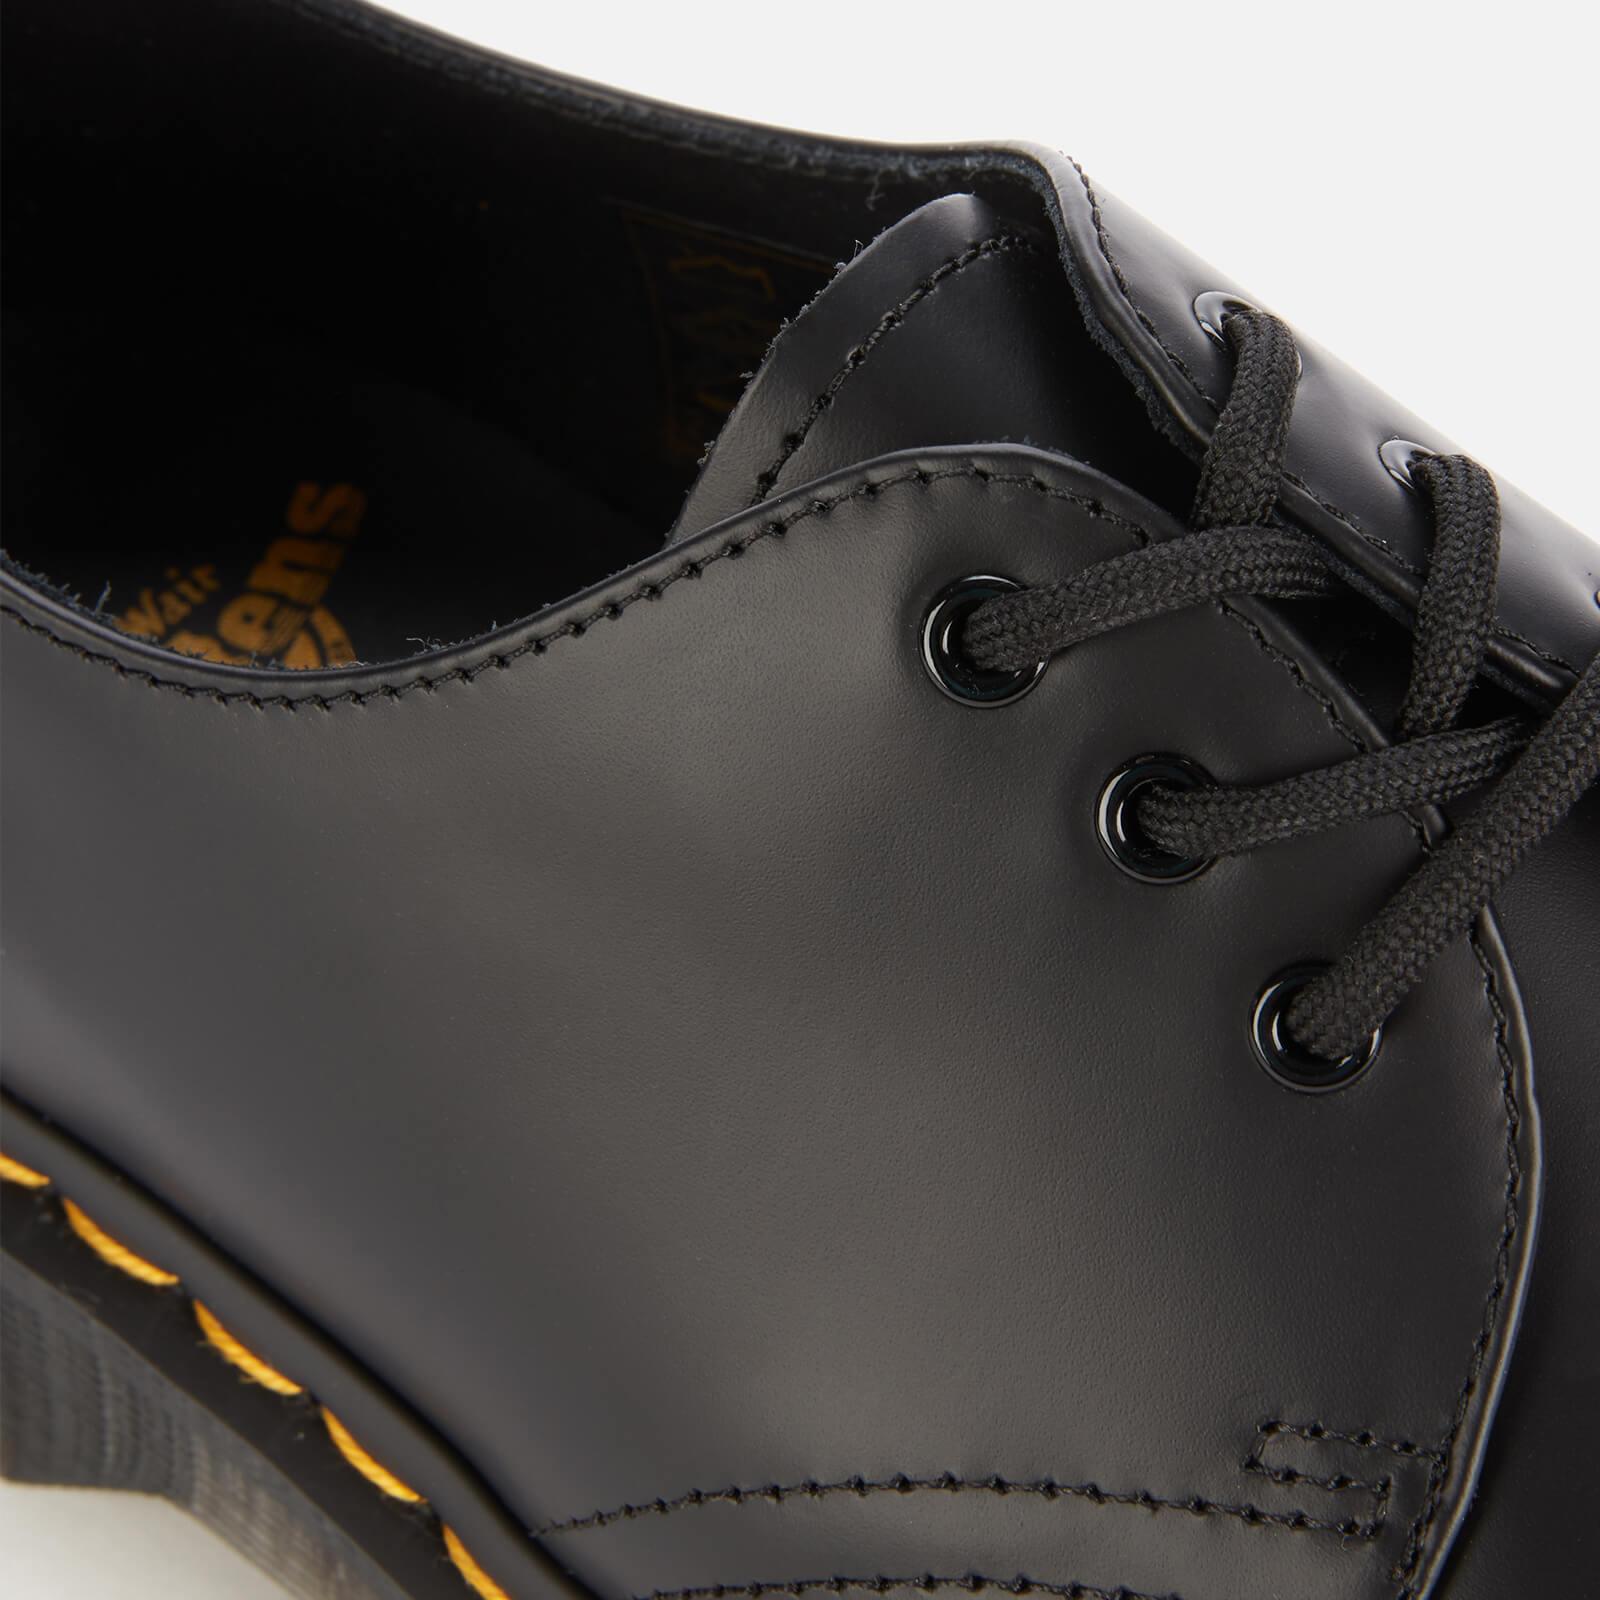 Dr. Martens 1461 Bex Smooth Leather 3-eye Shoes in Black | Lyst